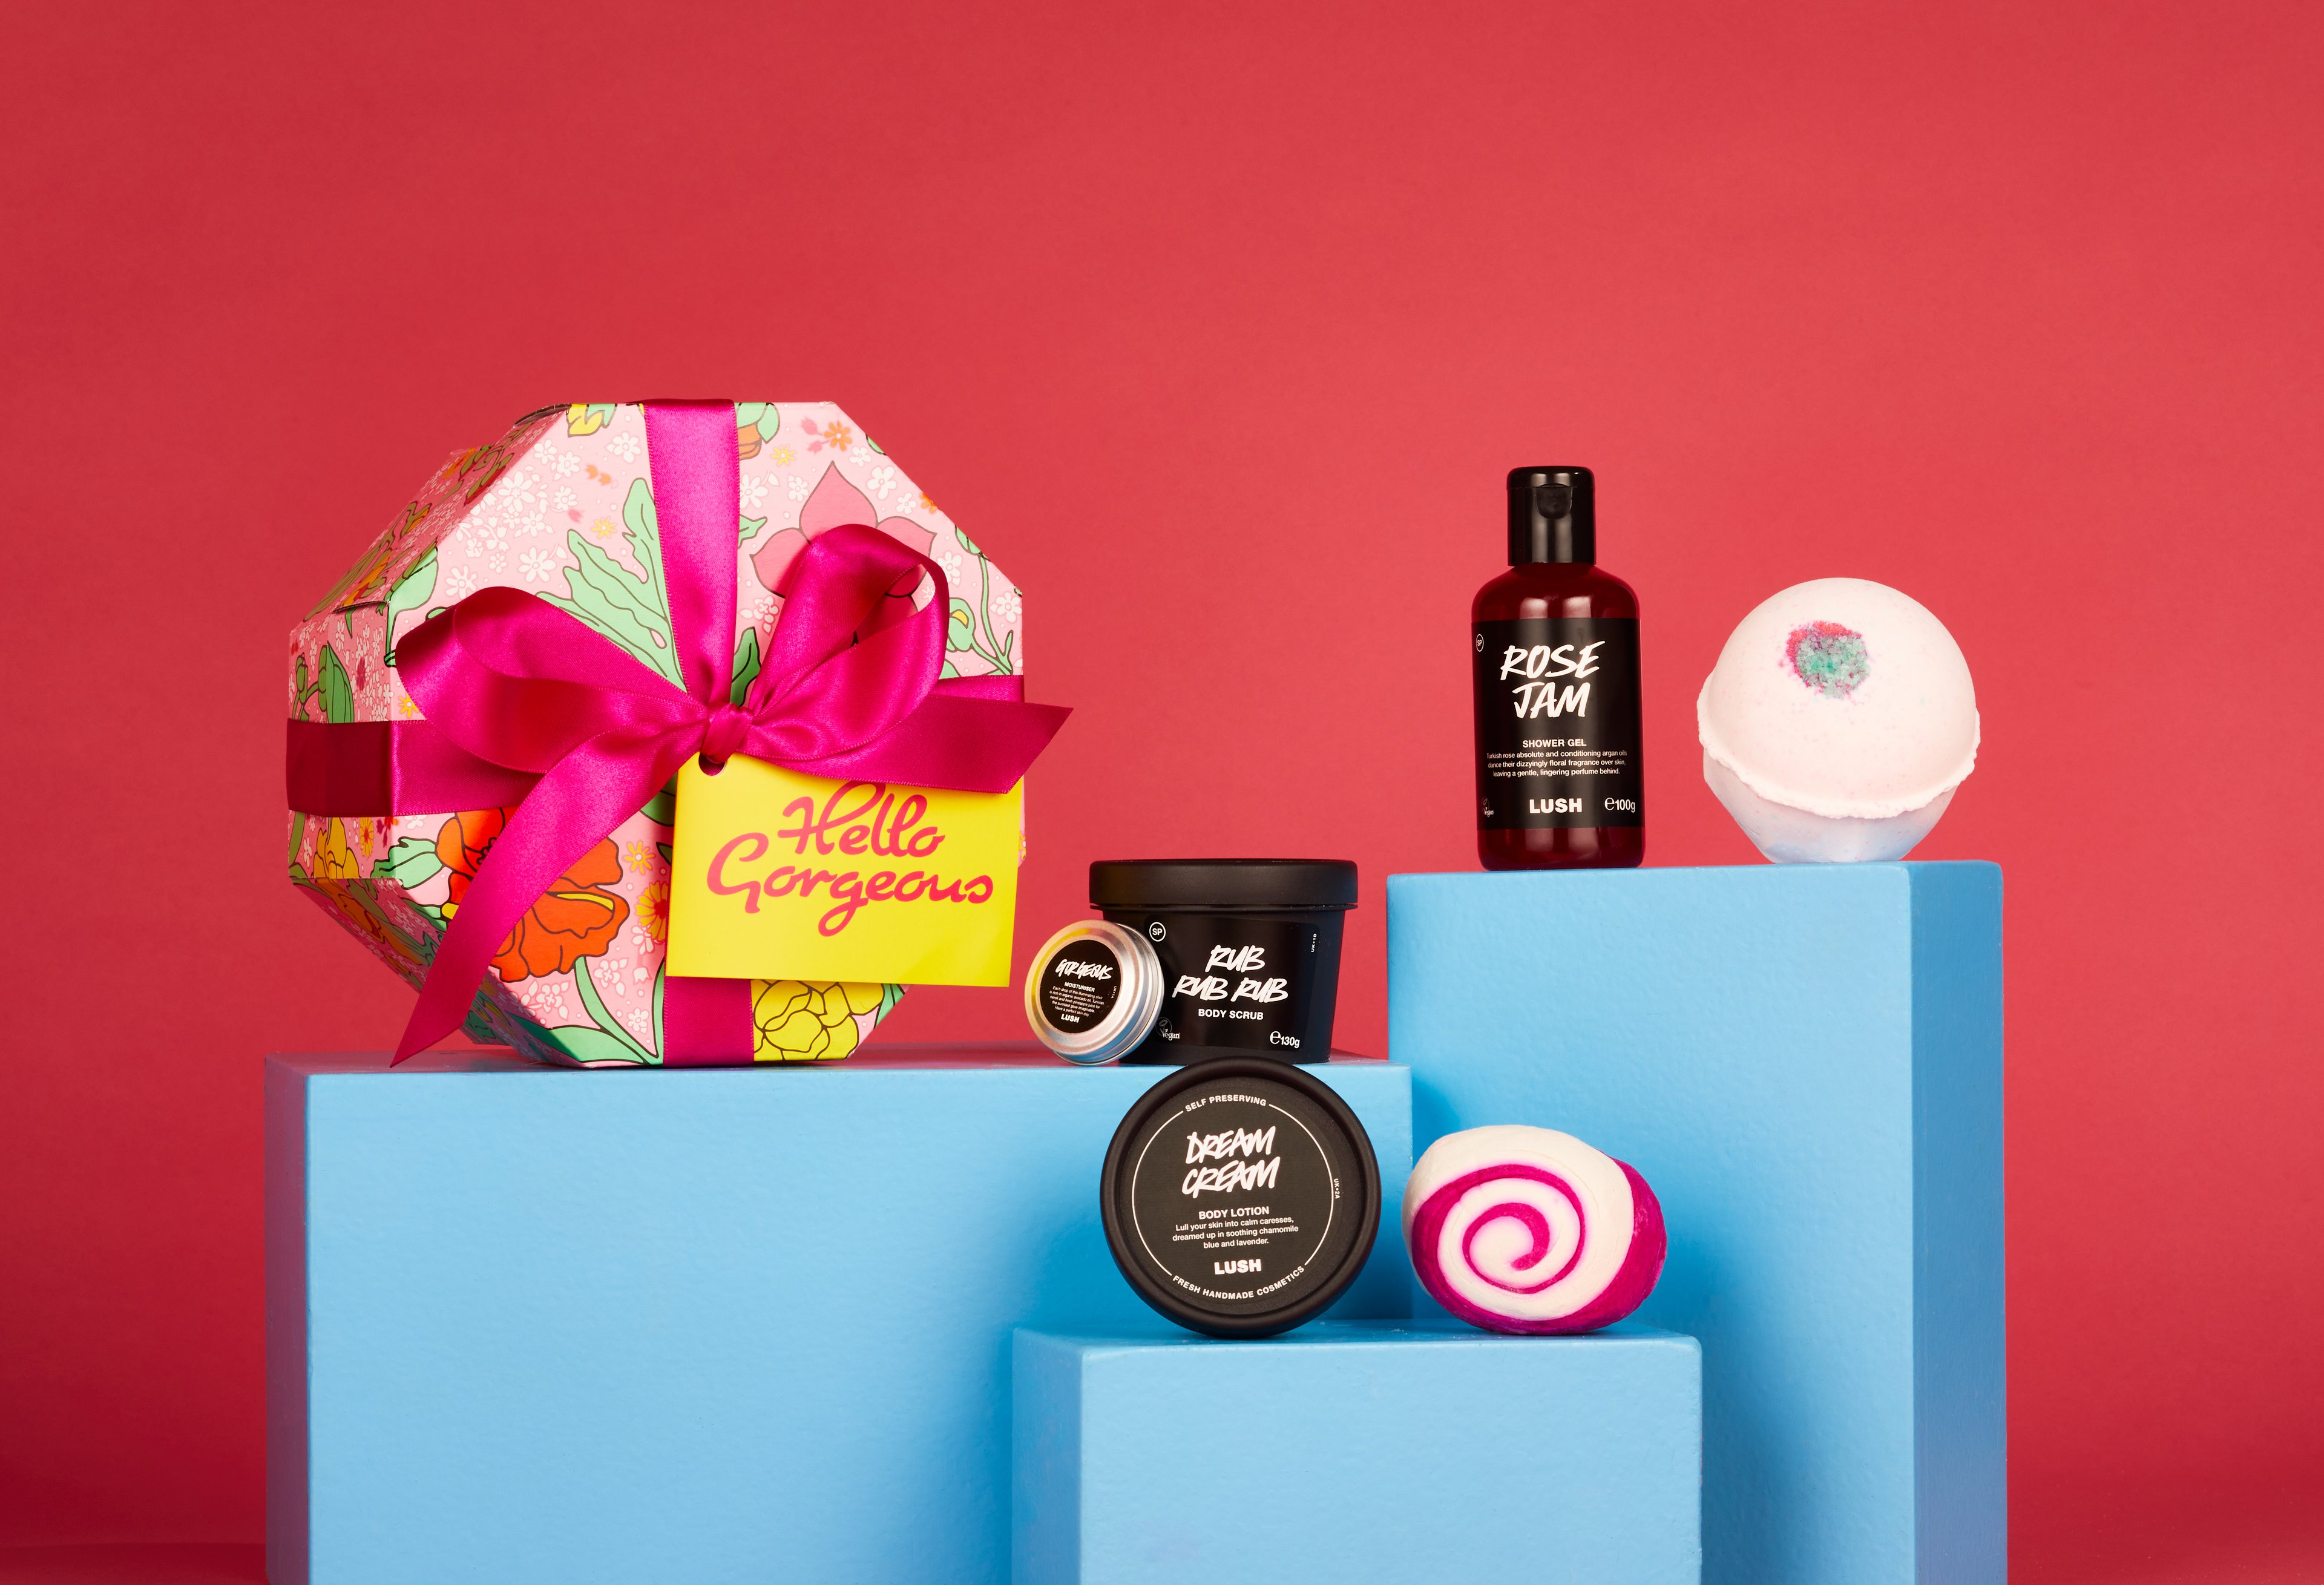 Gift products are displayed on tiered blue blocks with the gift box on the left on a deep red background.